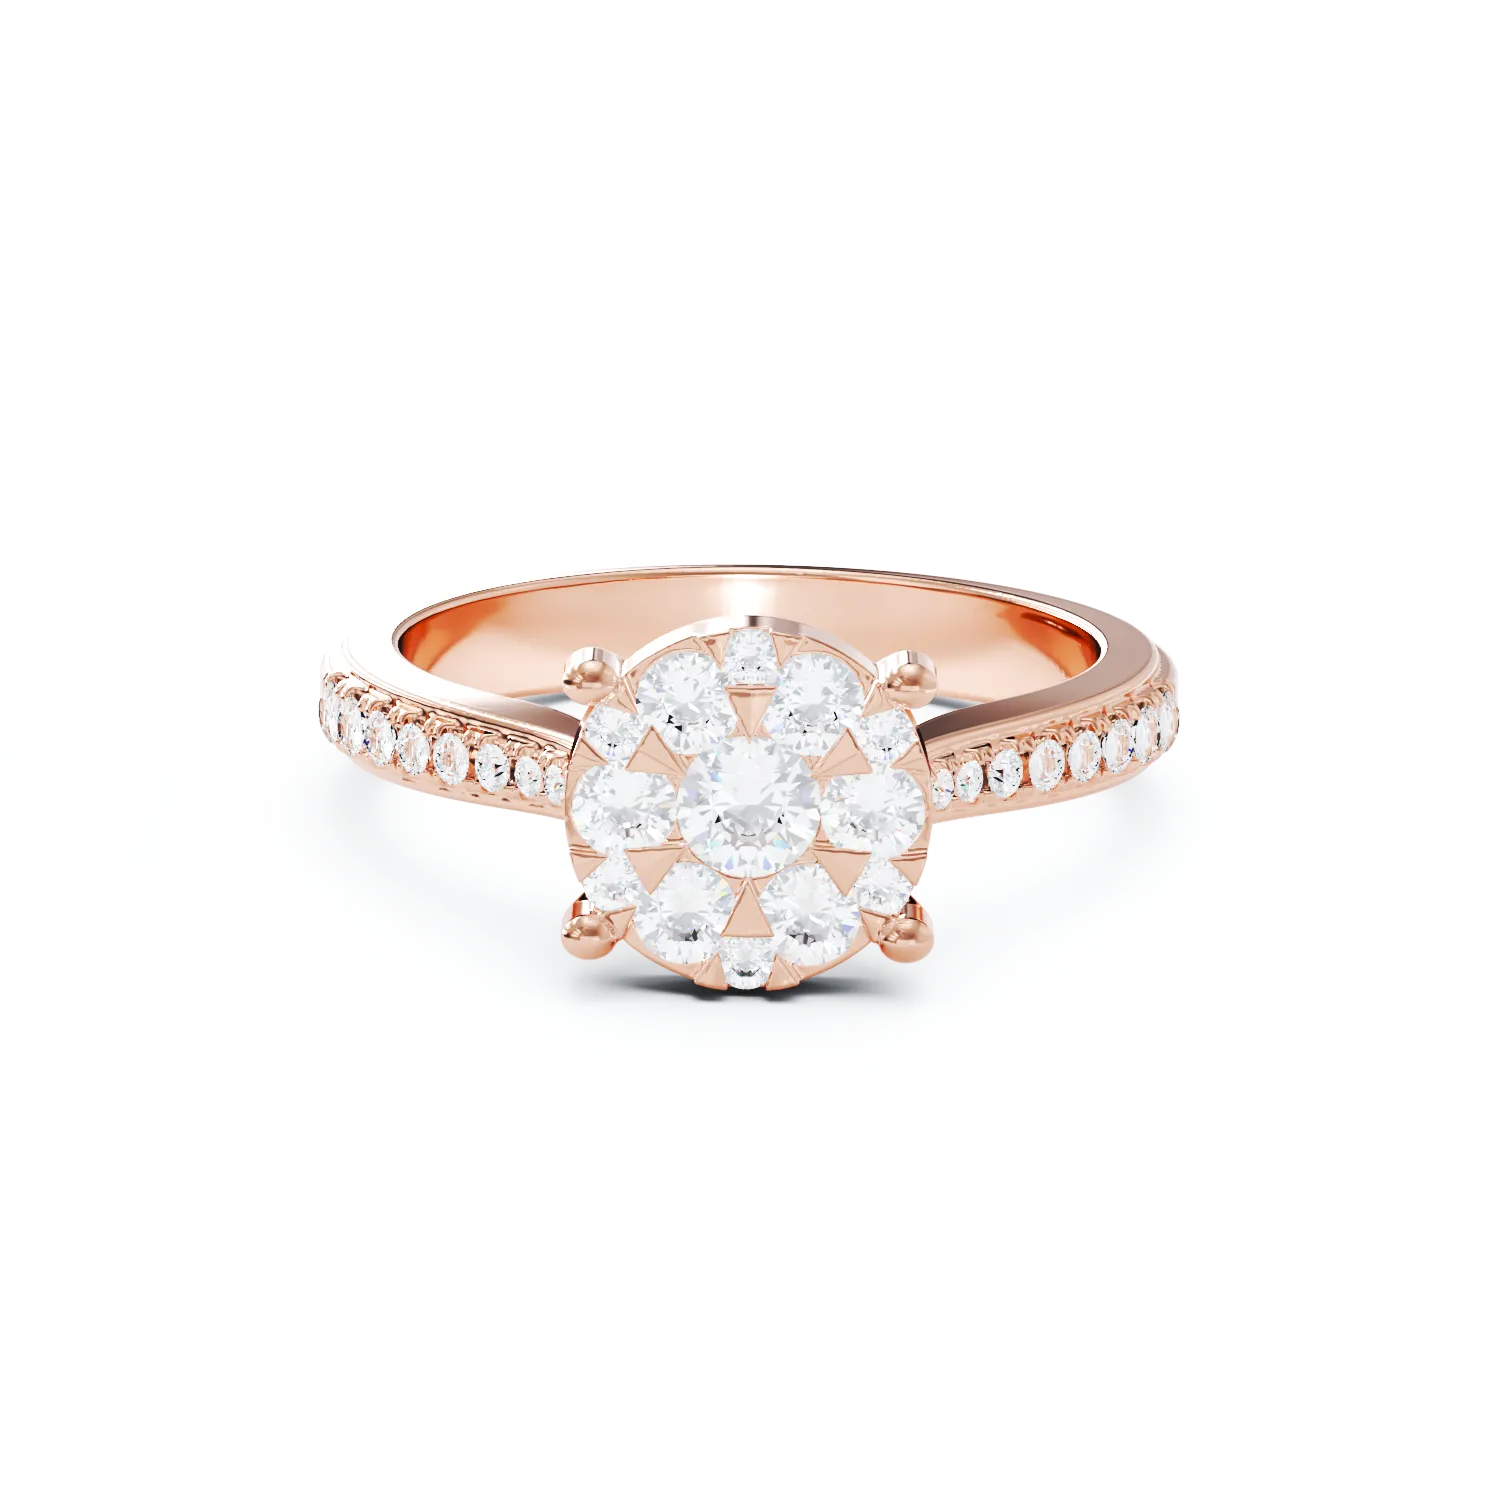 18K rose gold engagement ring with 0.49ct diamonds